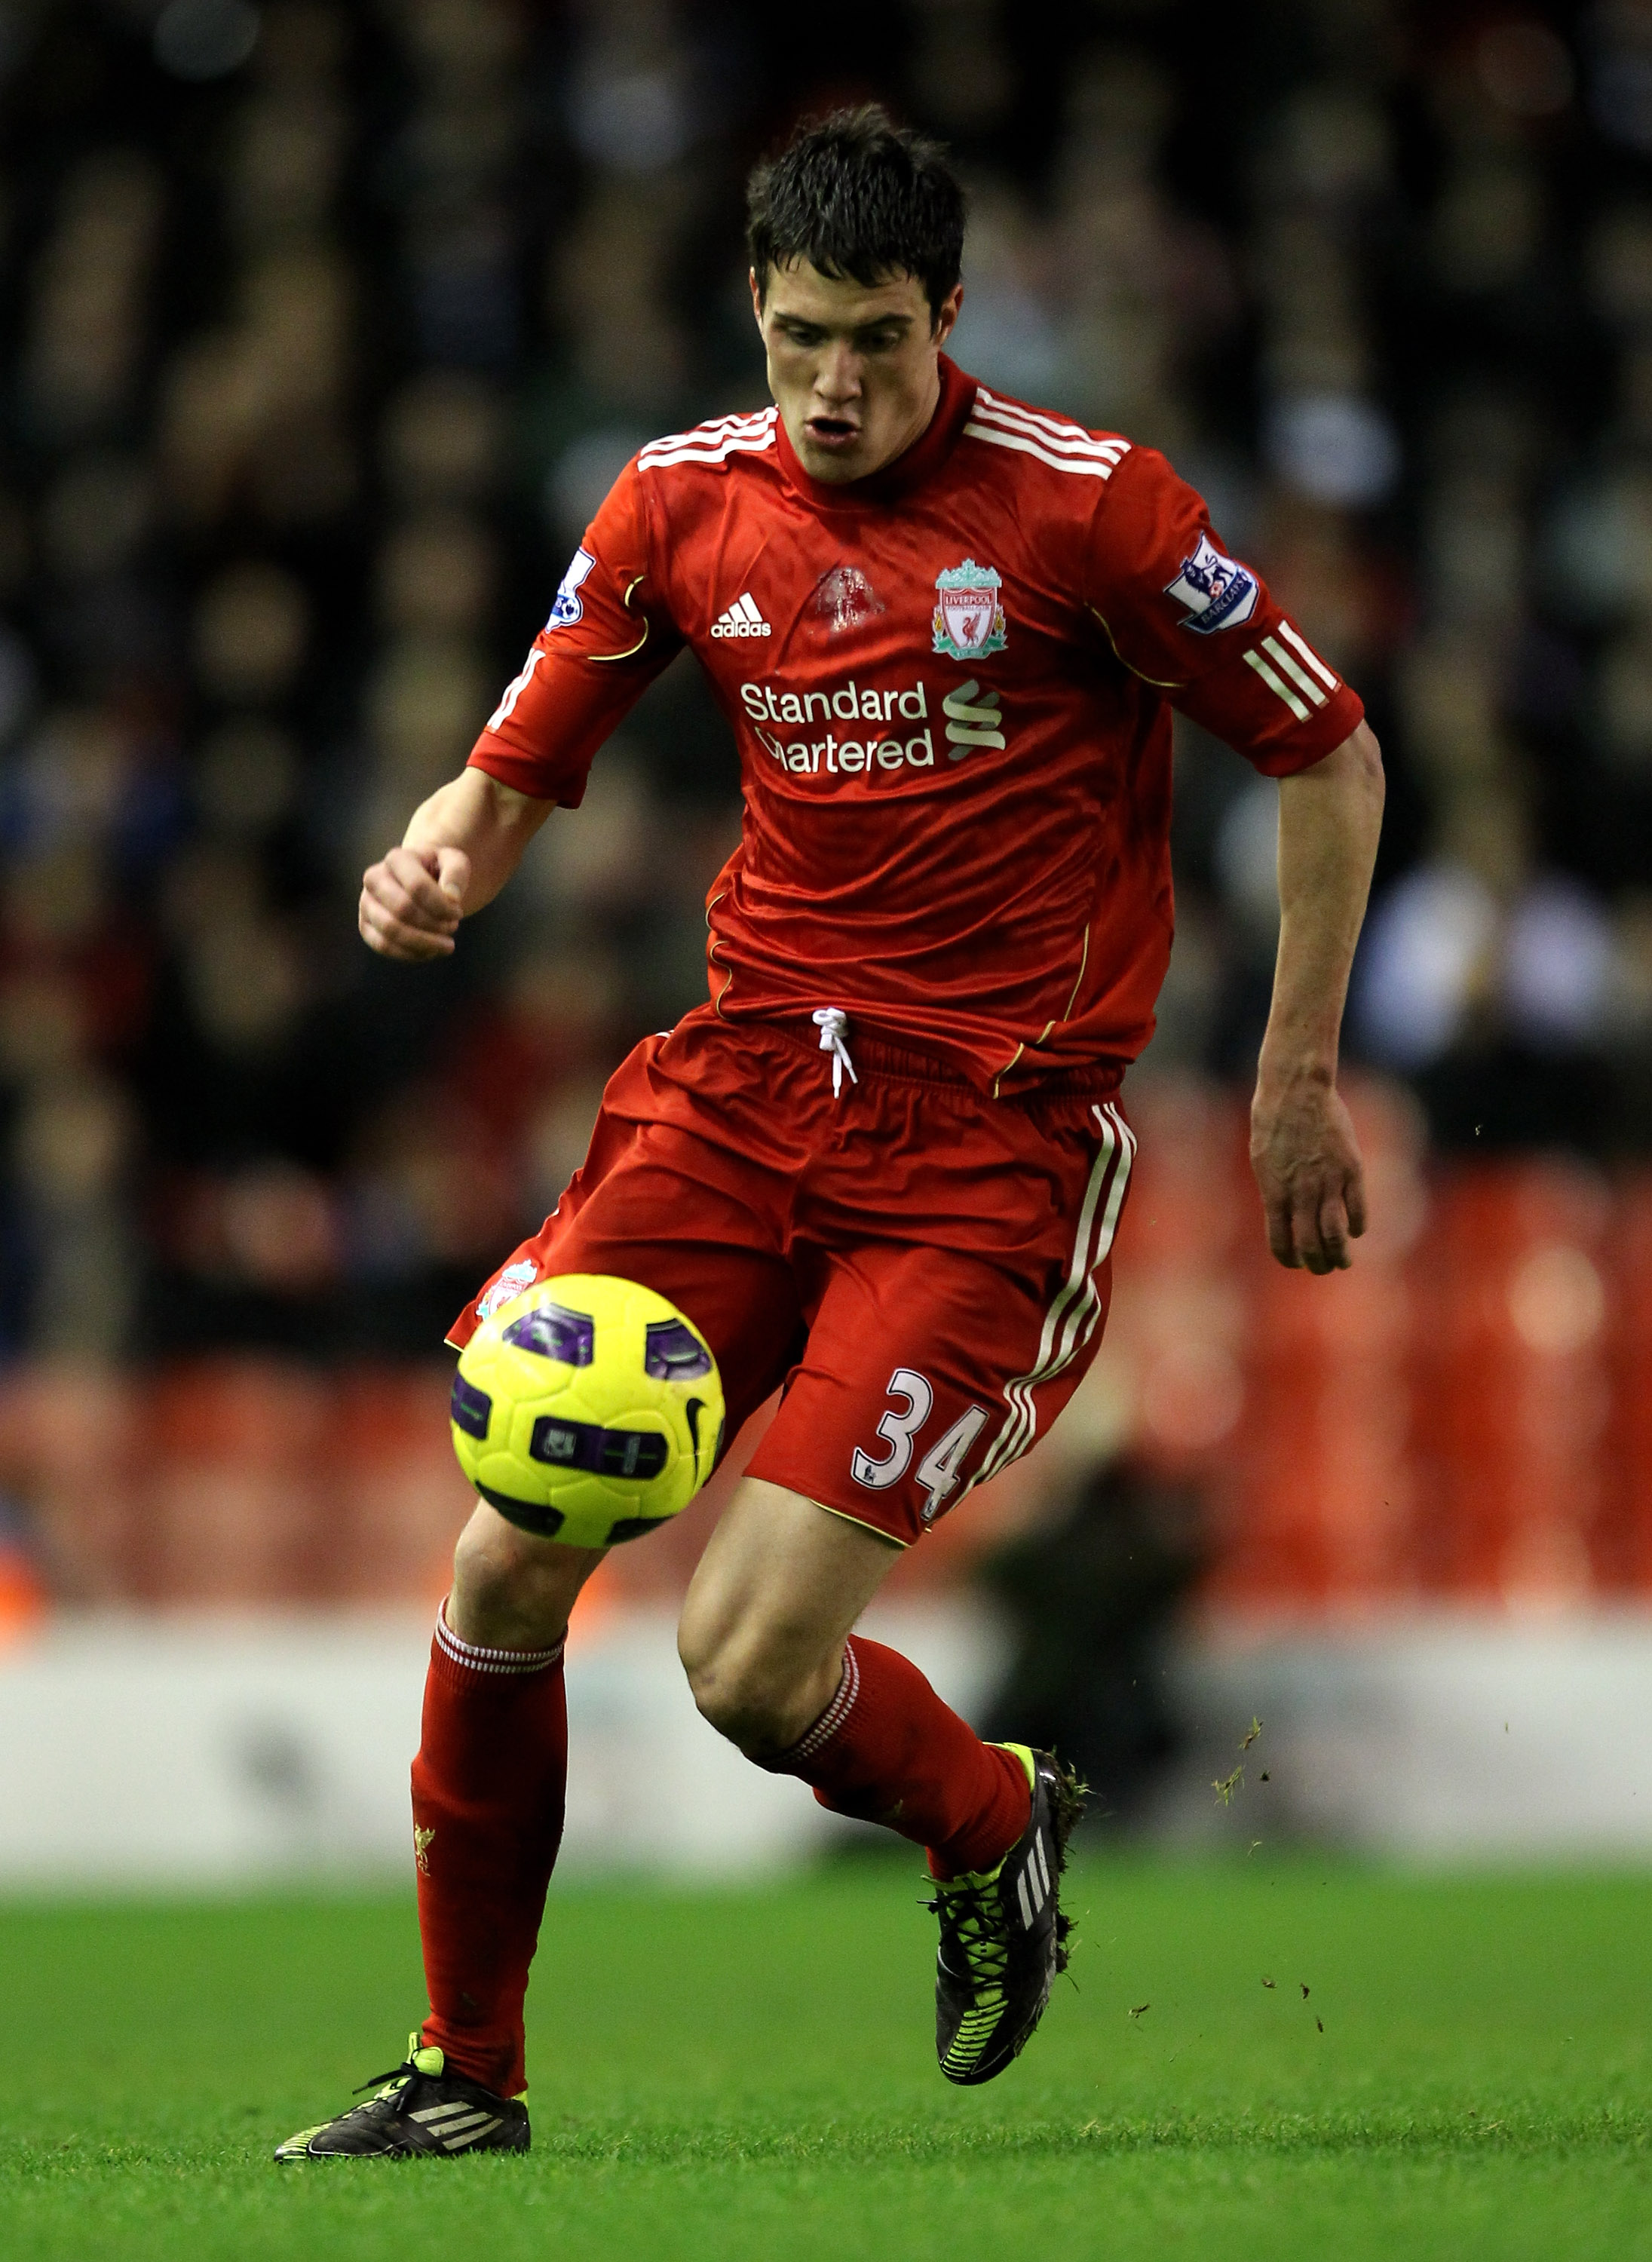 LIVERPOOL, ENGLAND - JANUARY 26:  Martin Kelly of Liverpool in action during the Barclays Premier League match between Liverpool and Fulham at Anfield on January 26, 2011 in Liverpool, England. (Photo by Alex Livesey/Getty Images)